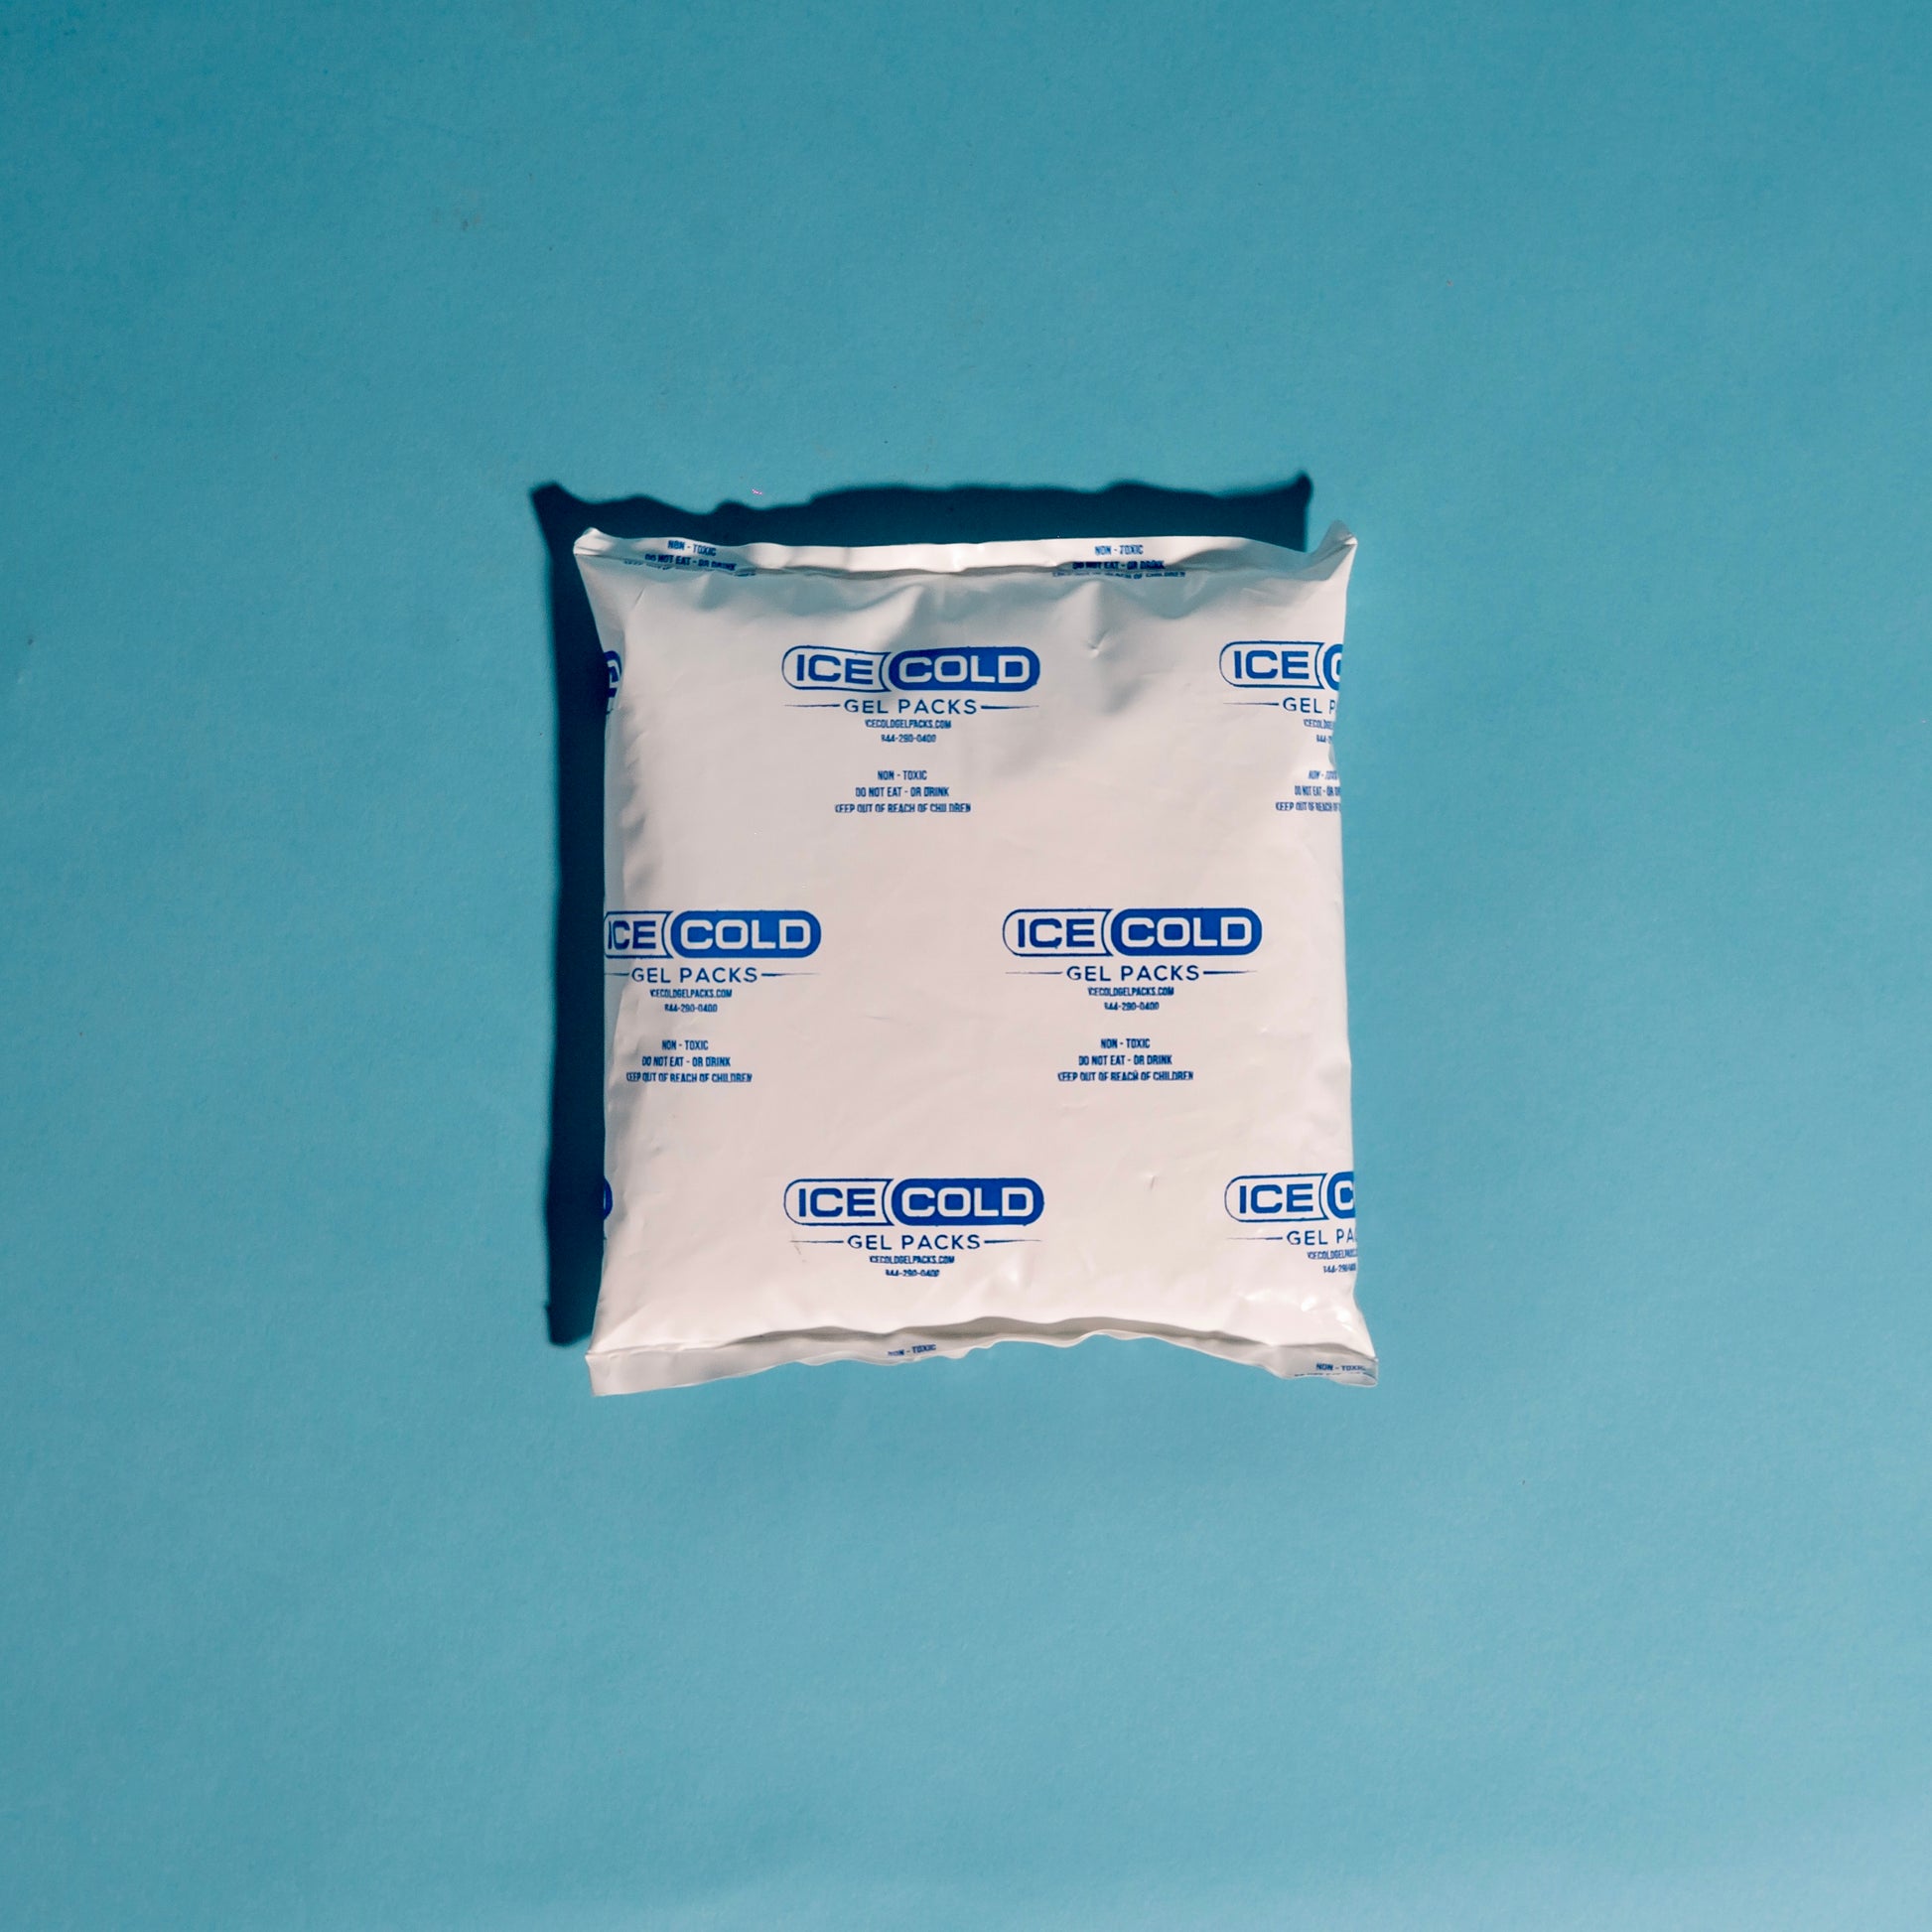 Silica Gel Packets-10 pack